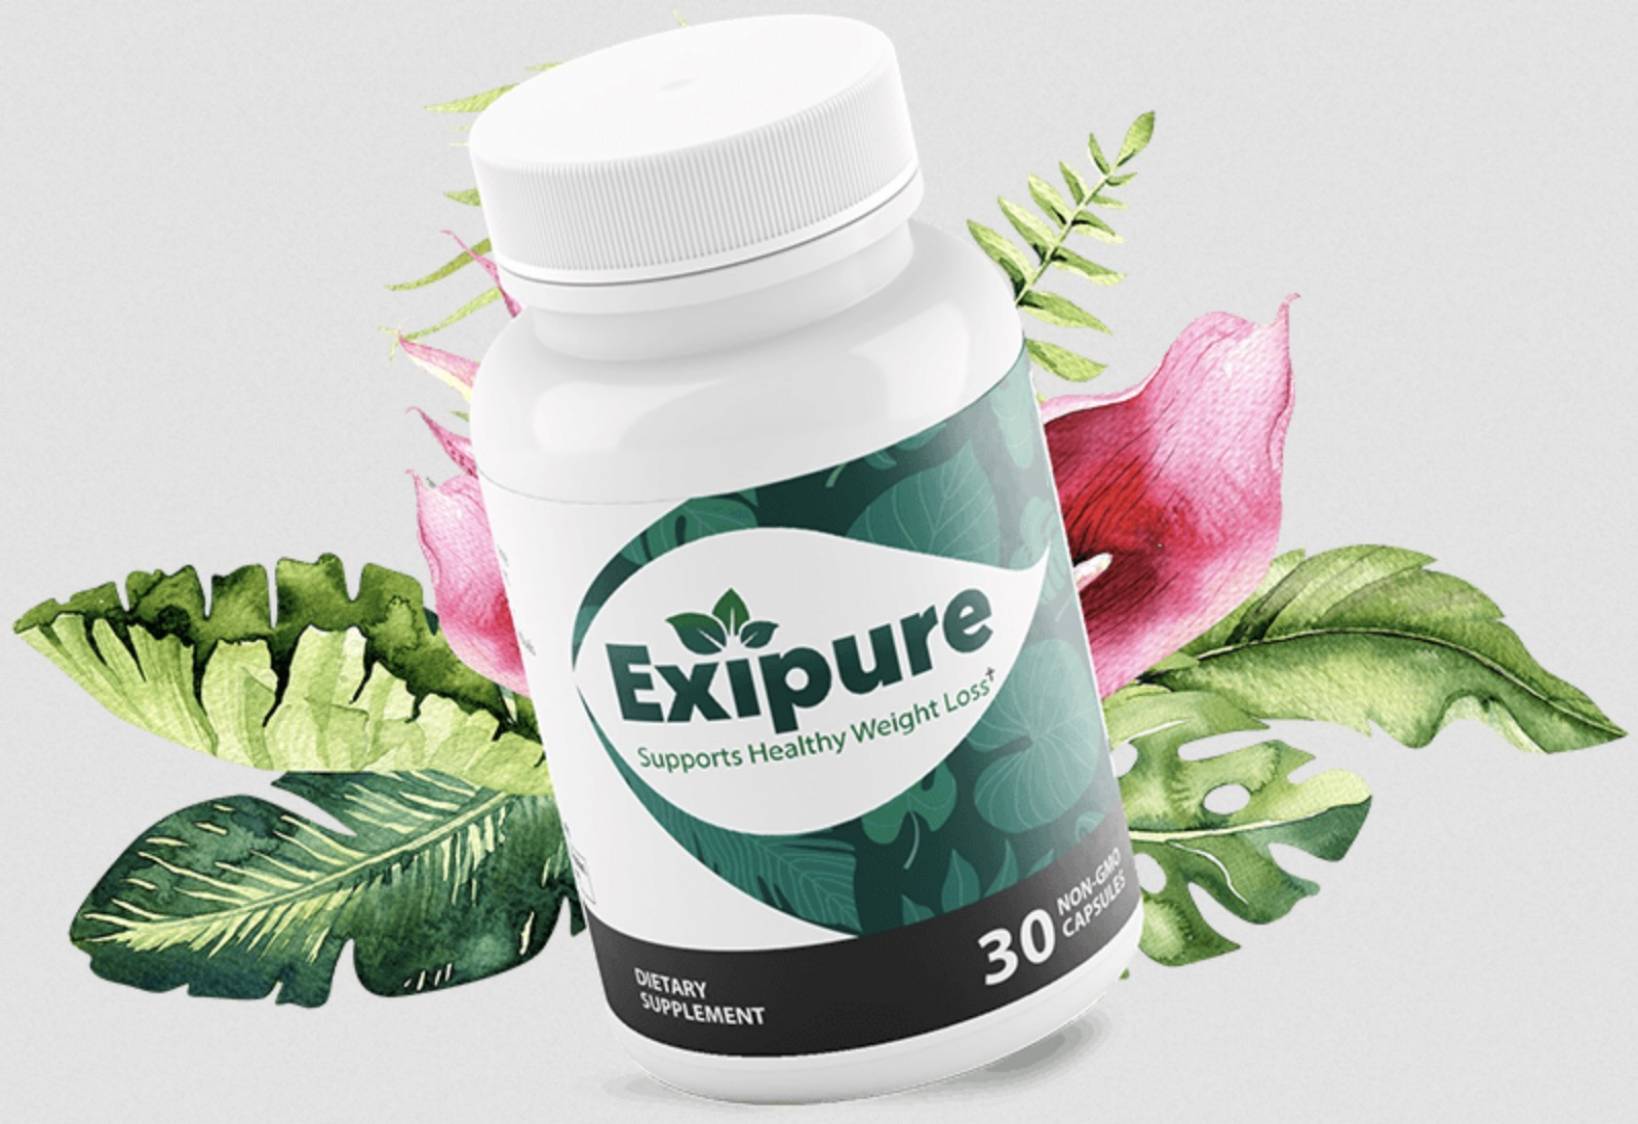 What Is Exipure Made Of